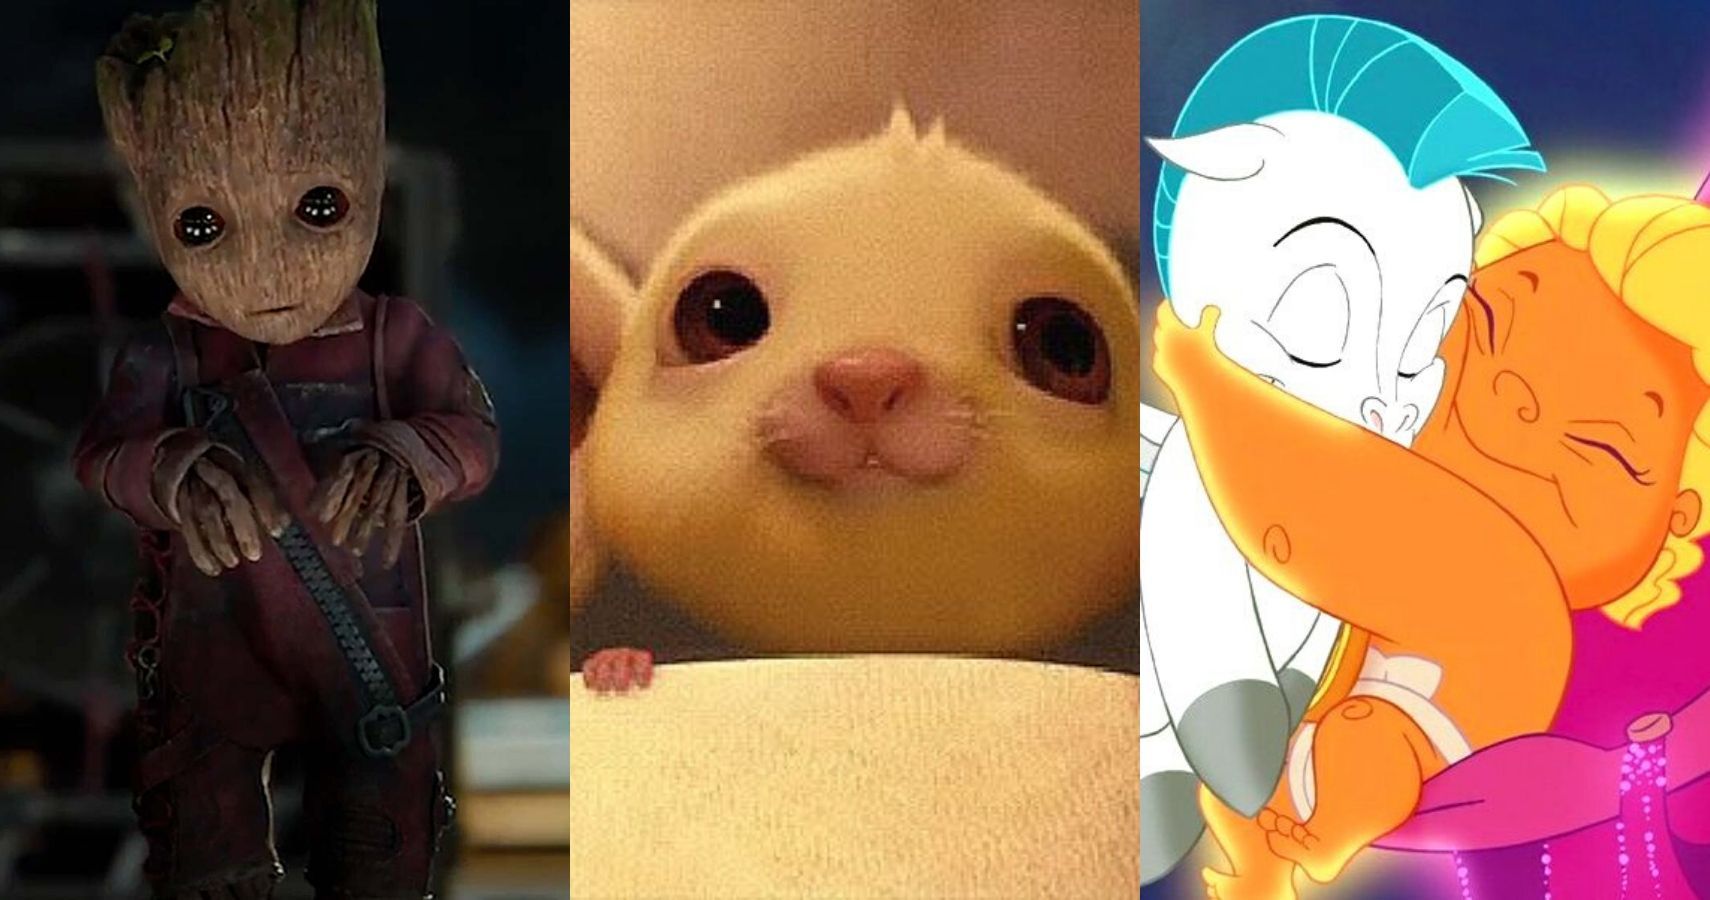 10 Fantasy Infants Who Are Cuter Than Baby Yoda Ranked